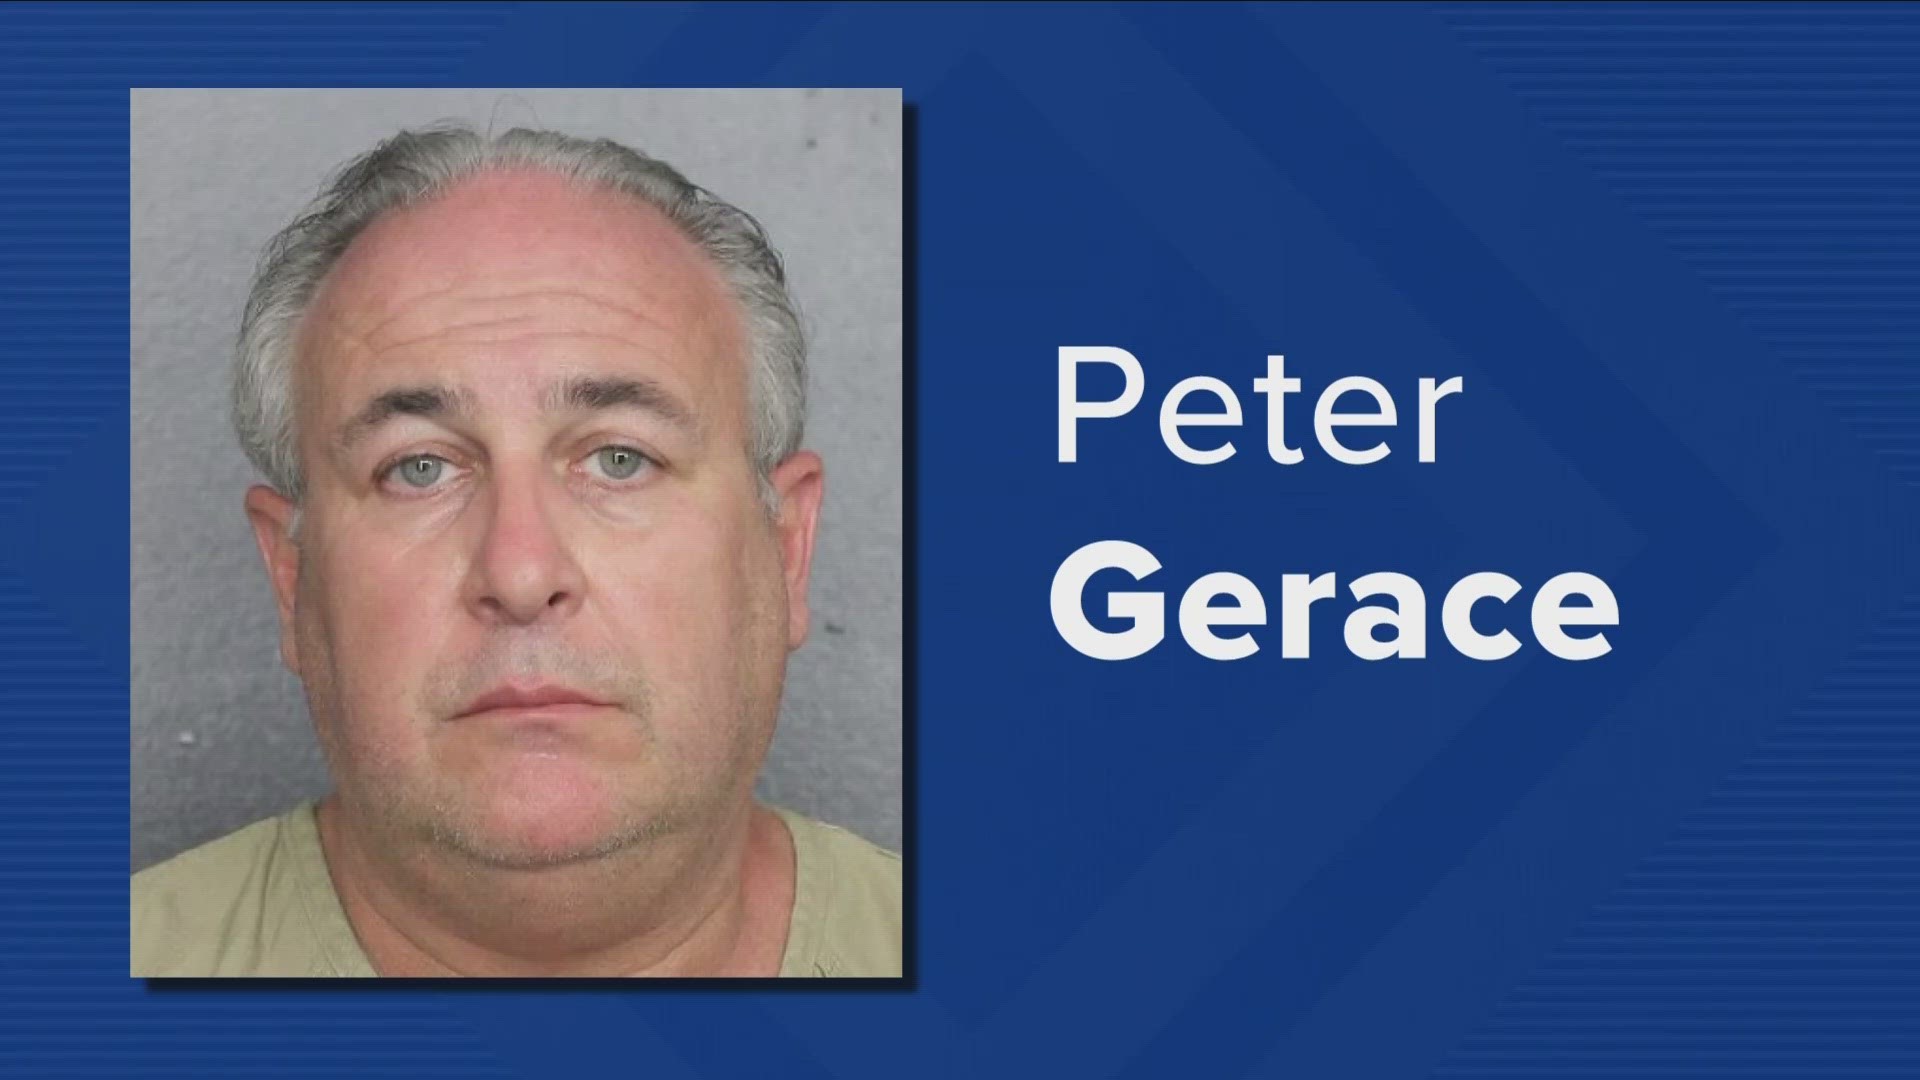 Peter Gerace is now accused of witness tampering in addition to his previous charges.